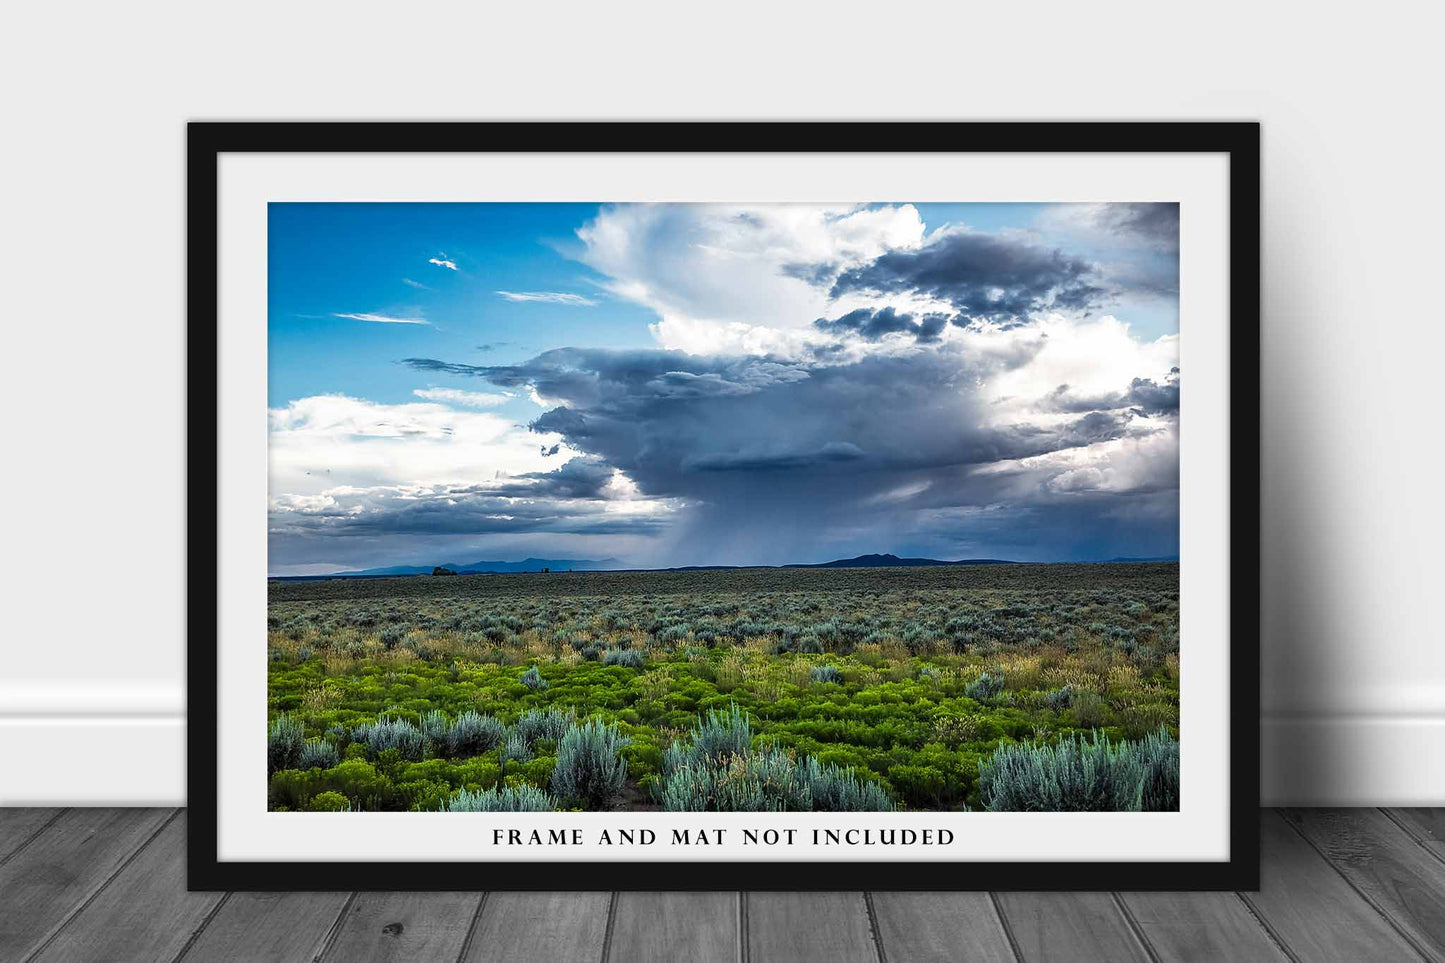 Desert Photography Print - Picture of Monsoon Storm Over Mountains Near Taos New Mexico Scenic Southwest Sky Landscape Decor 4x6 to 30x45